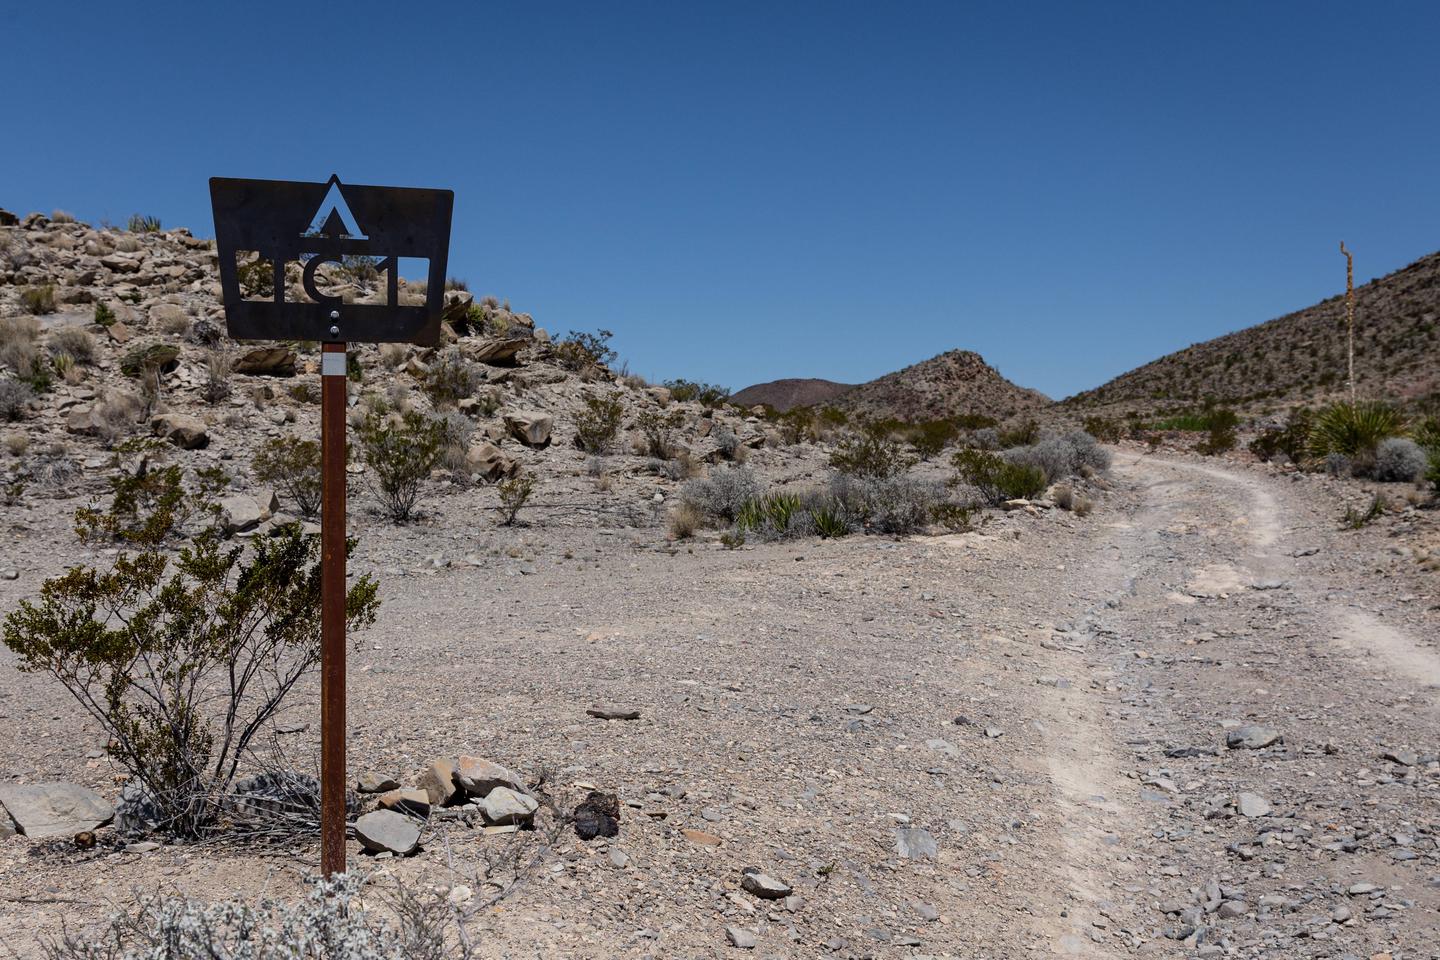 Camping area with desert mountain backgroundCampsite marker and access road to campsite